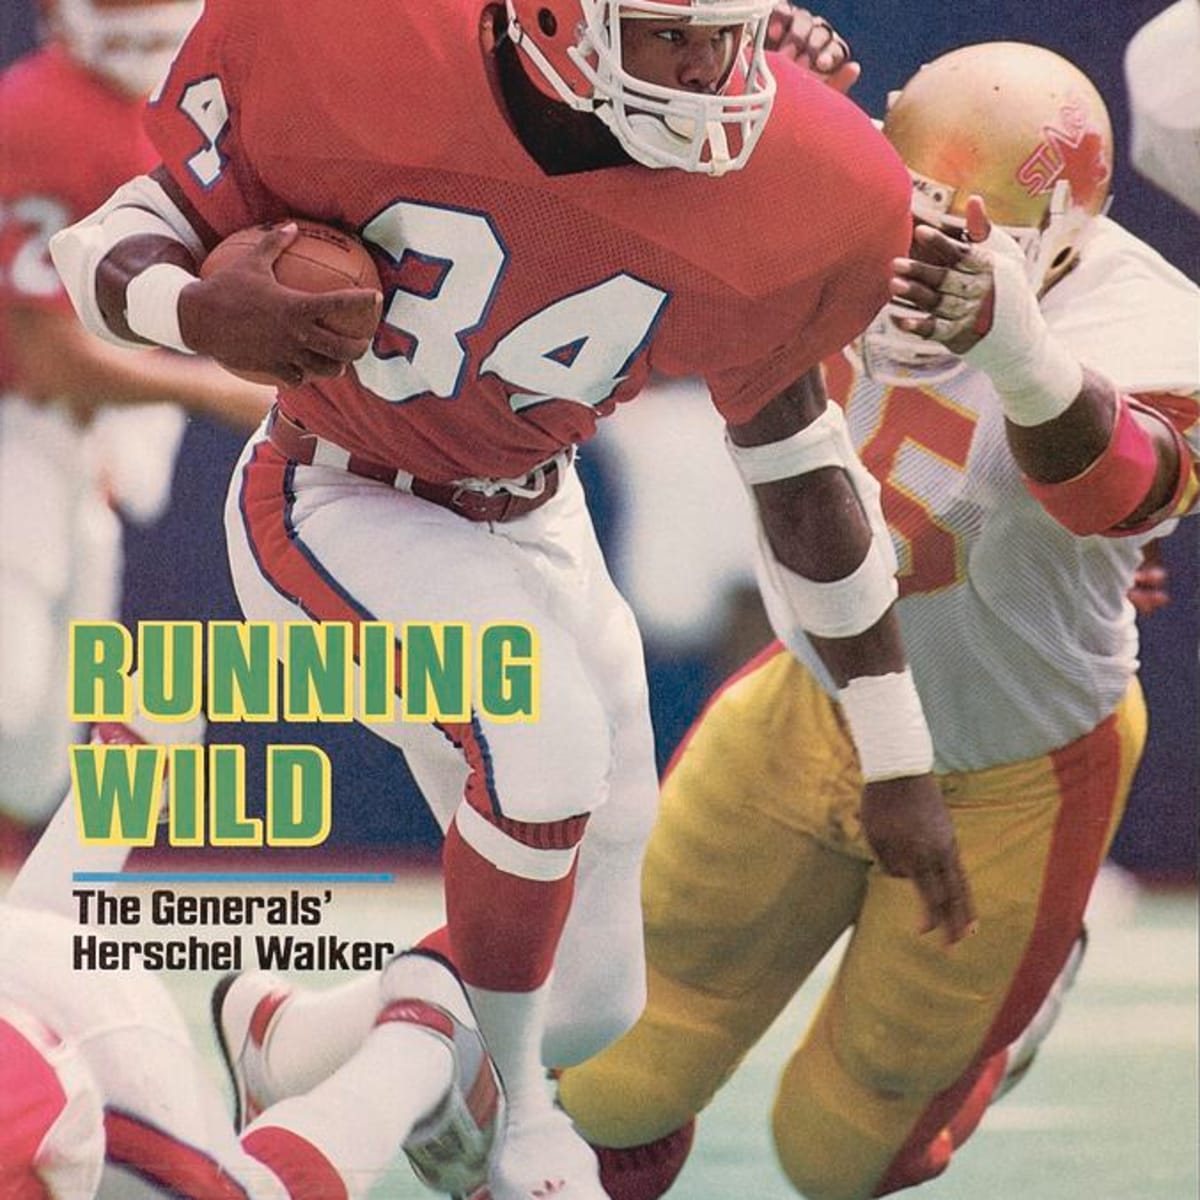 USFL: Revisiting The Glory Days - Visit NFL Draft on Sports Illustrated,  the latest news coverage, with rankings for NFL Draft prospects, College  Football, Dynasty and Devy Fantasy Football.